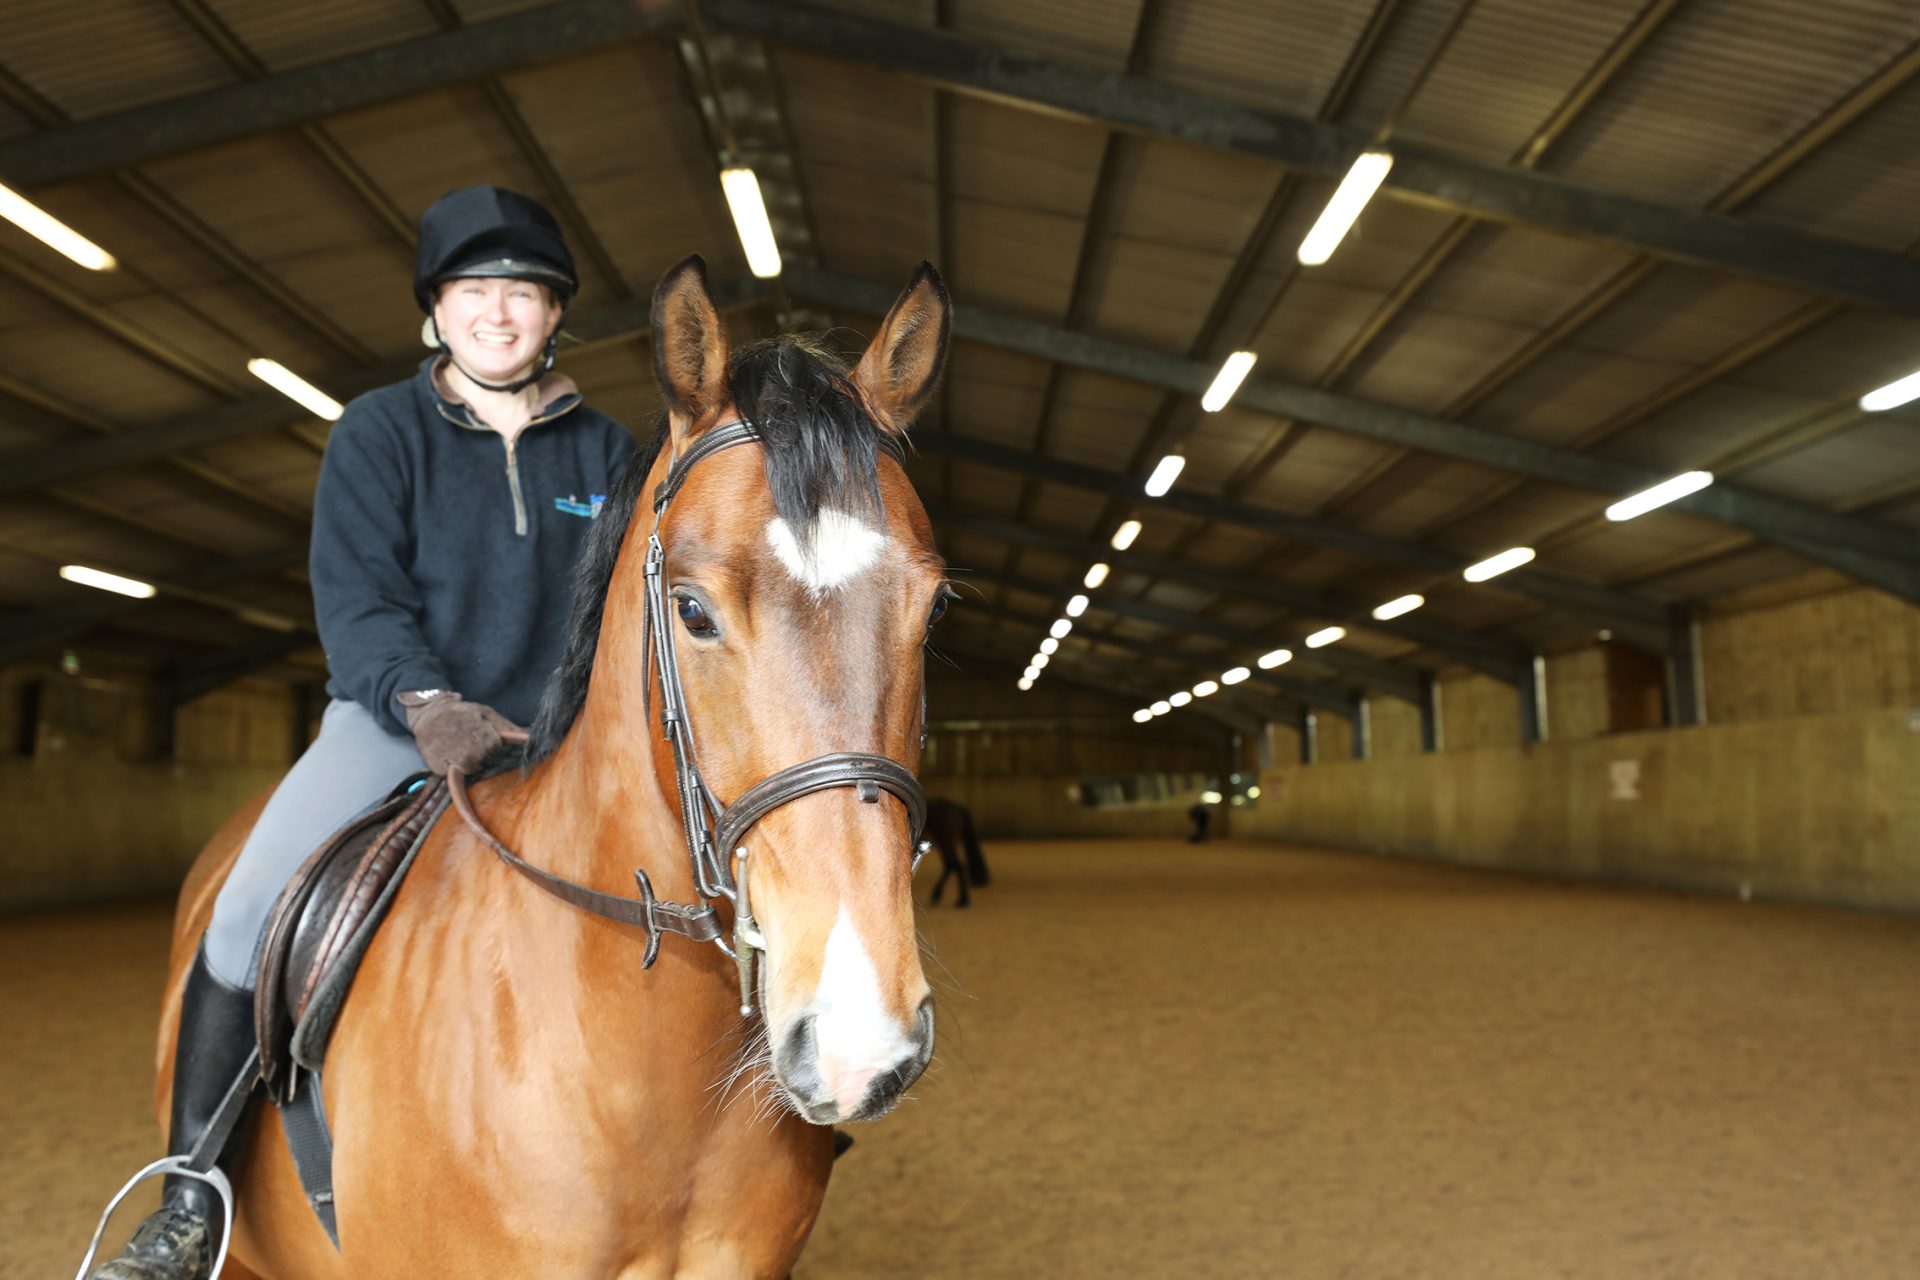 Equine student riding a horse in indoor arena